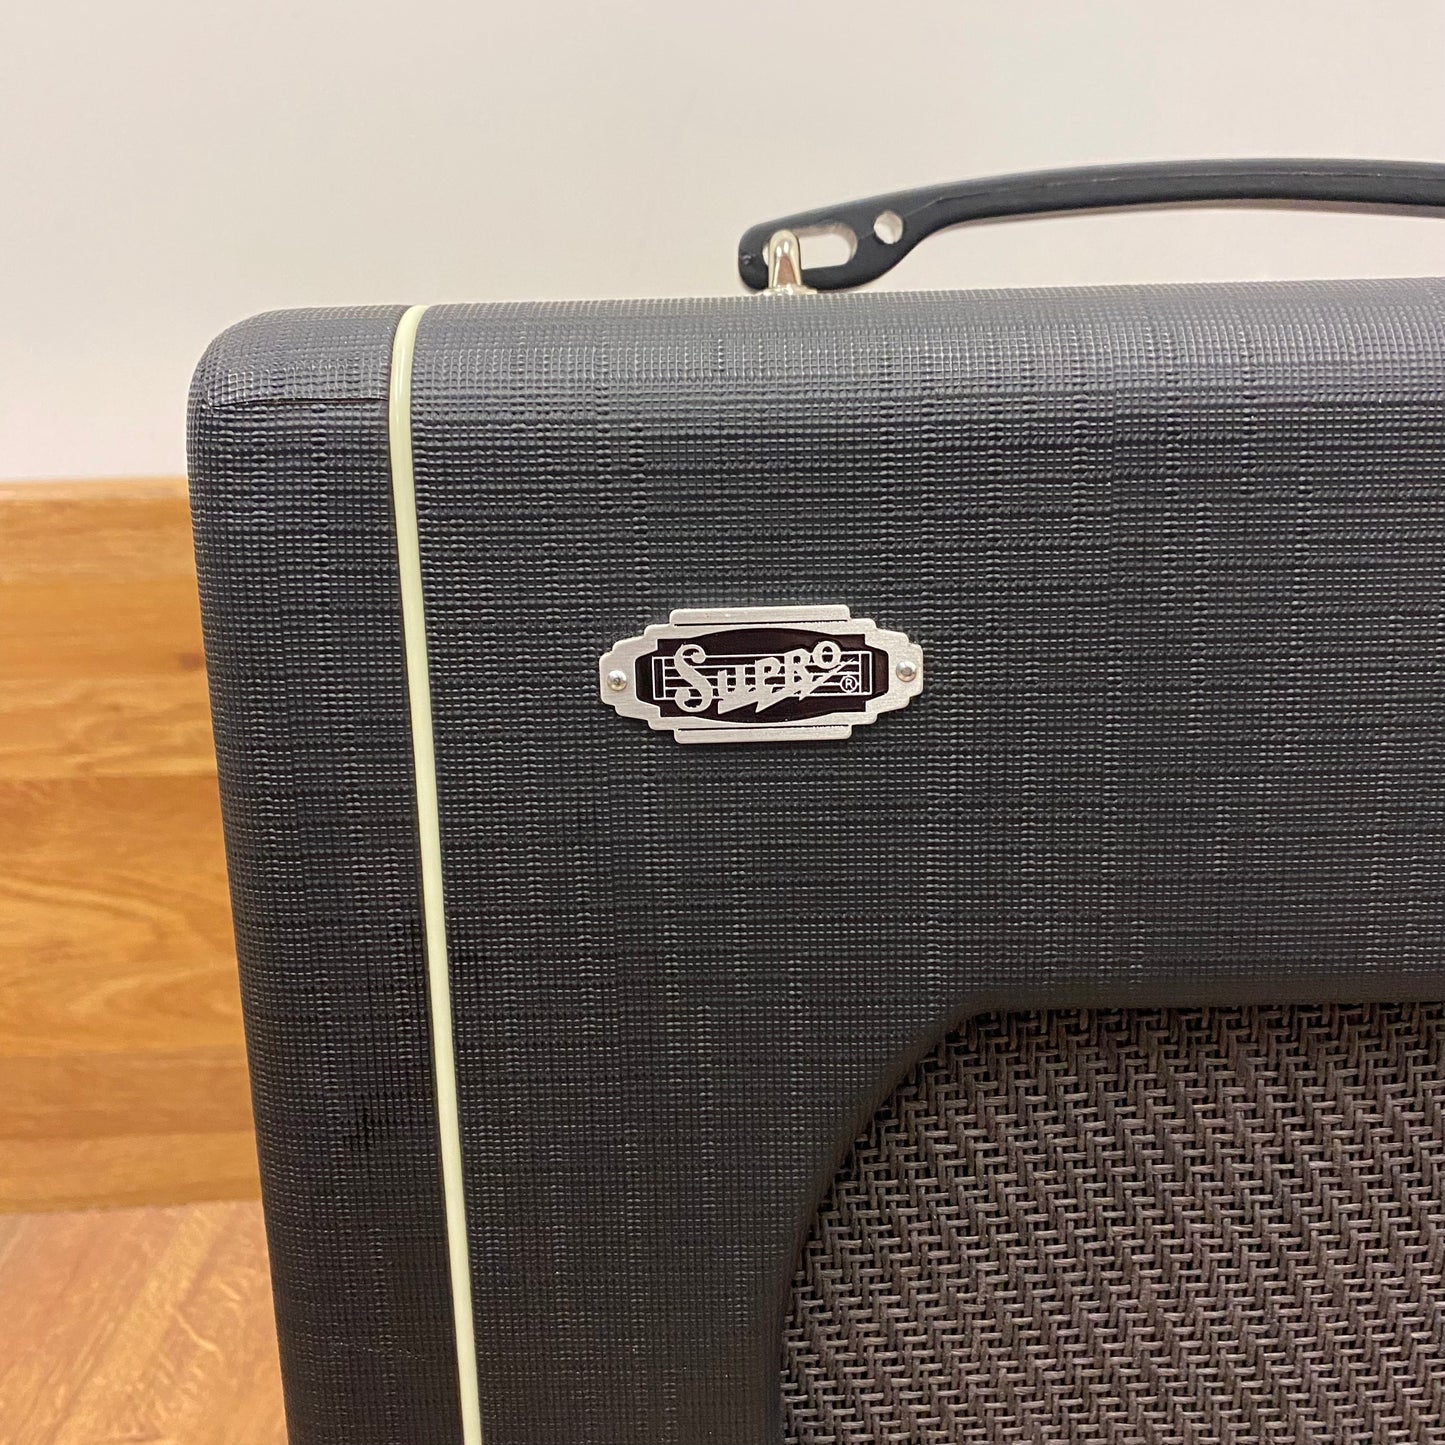 Pre-Owned Supro Blues King 8 1x8 1w Combo Amp